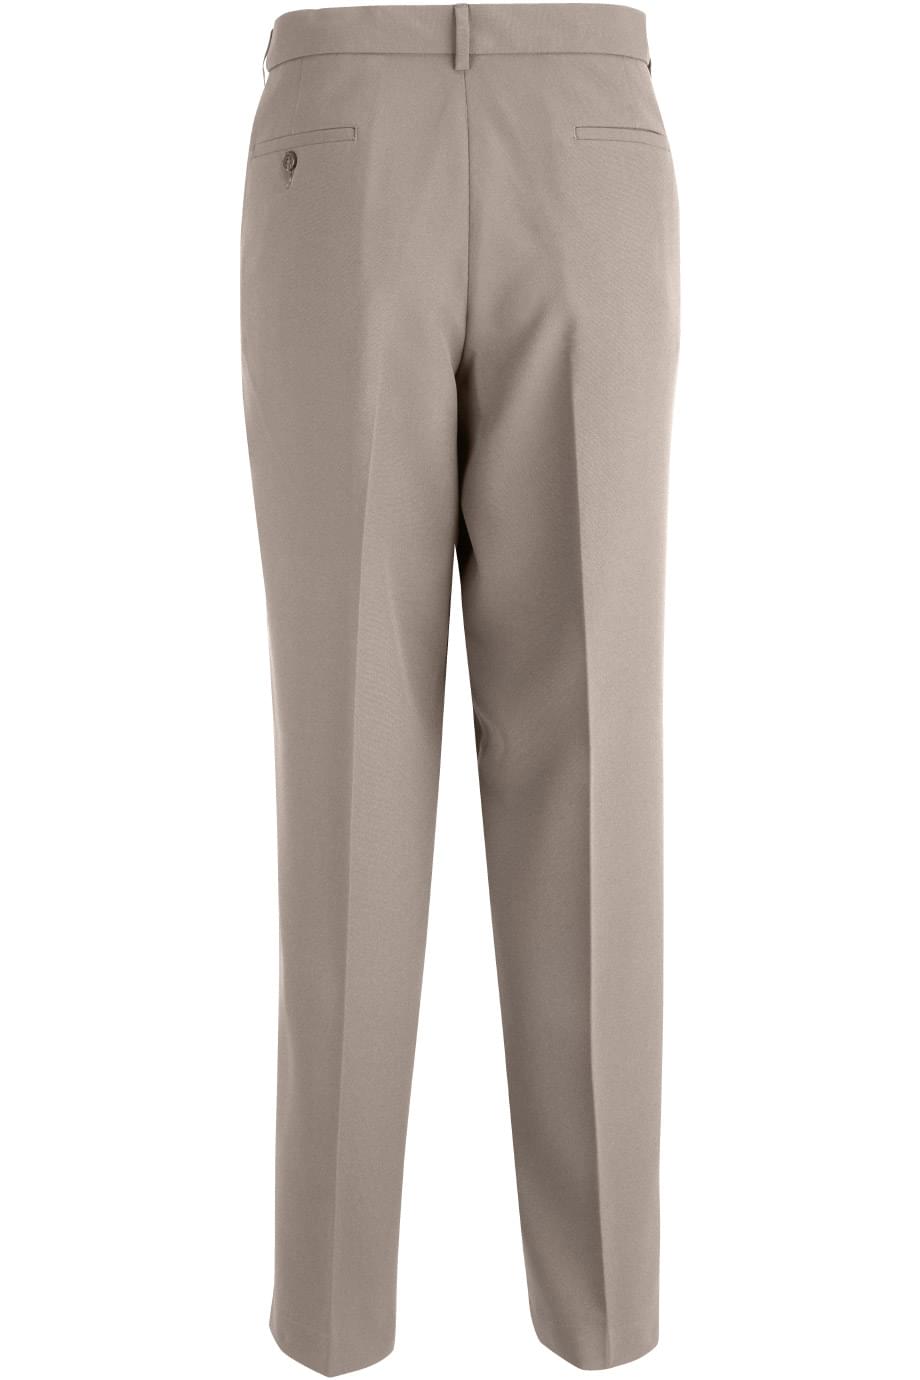 edwards ESSENTIAL FLAT FRONT PANT